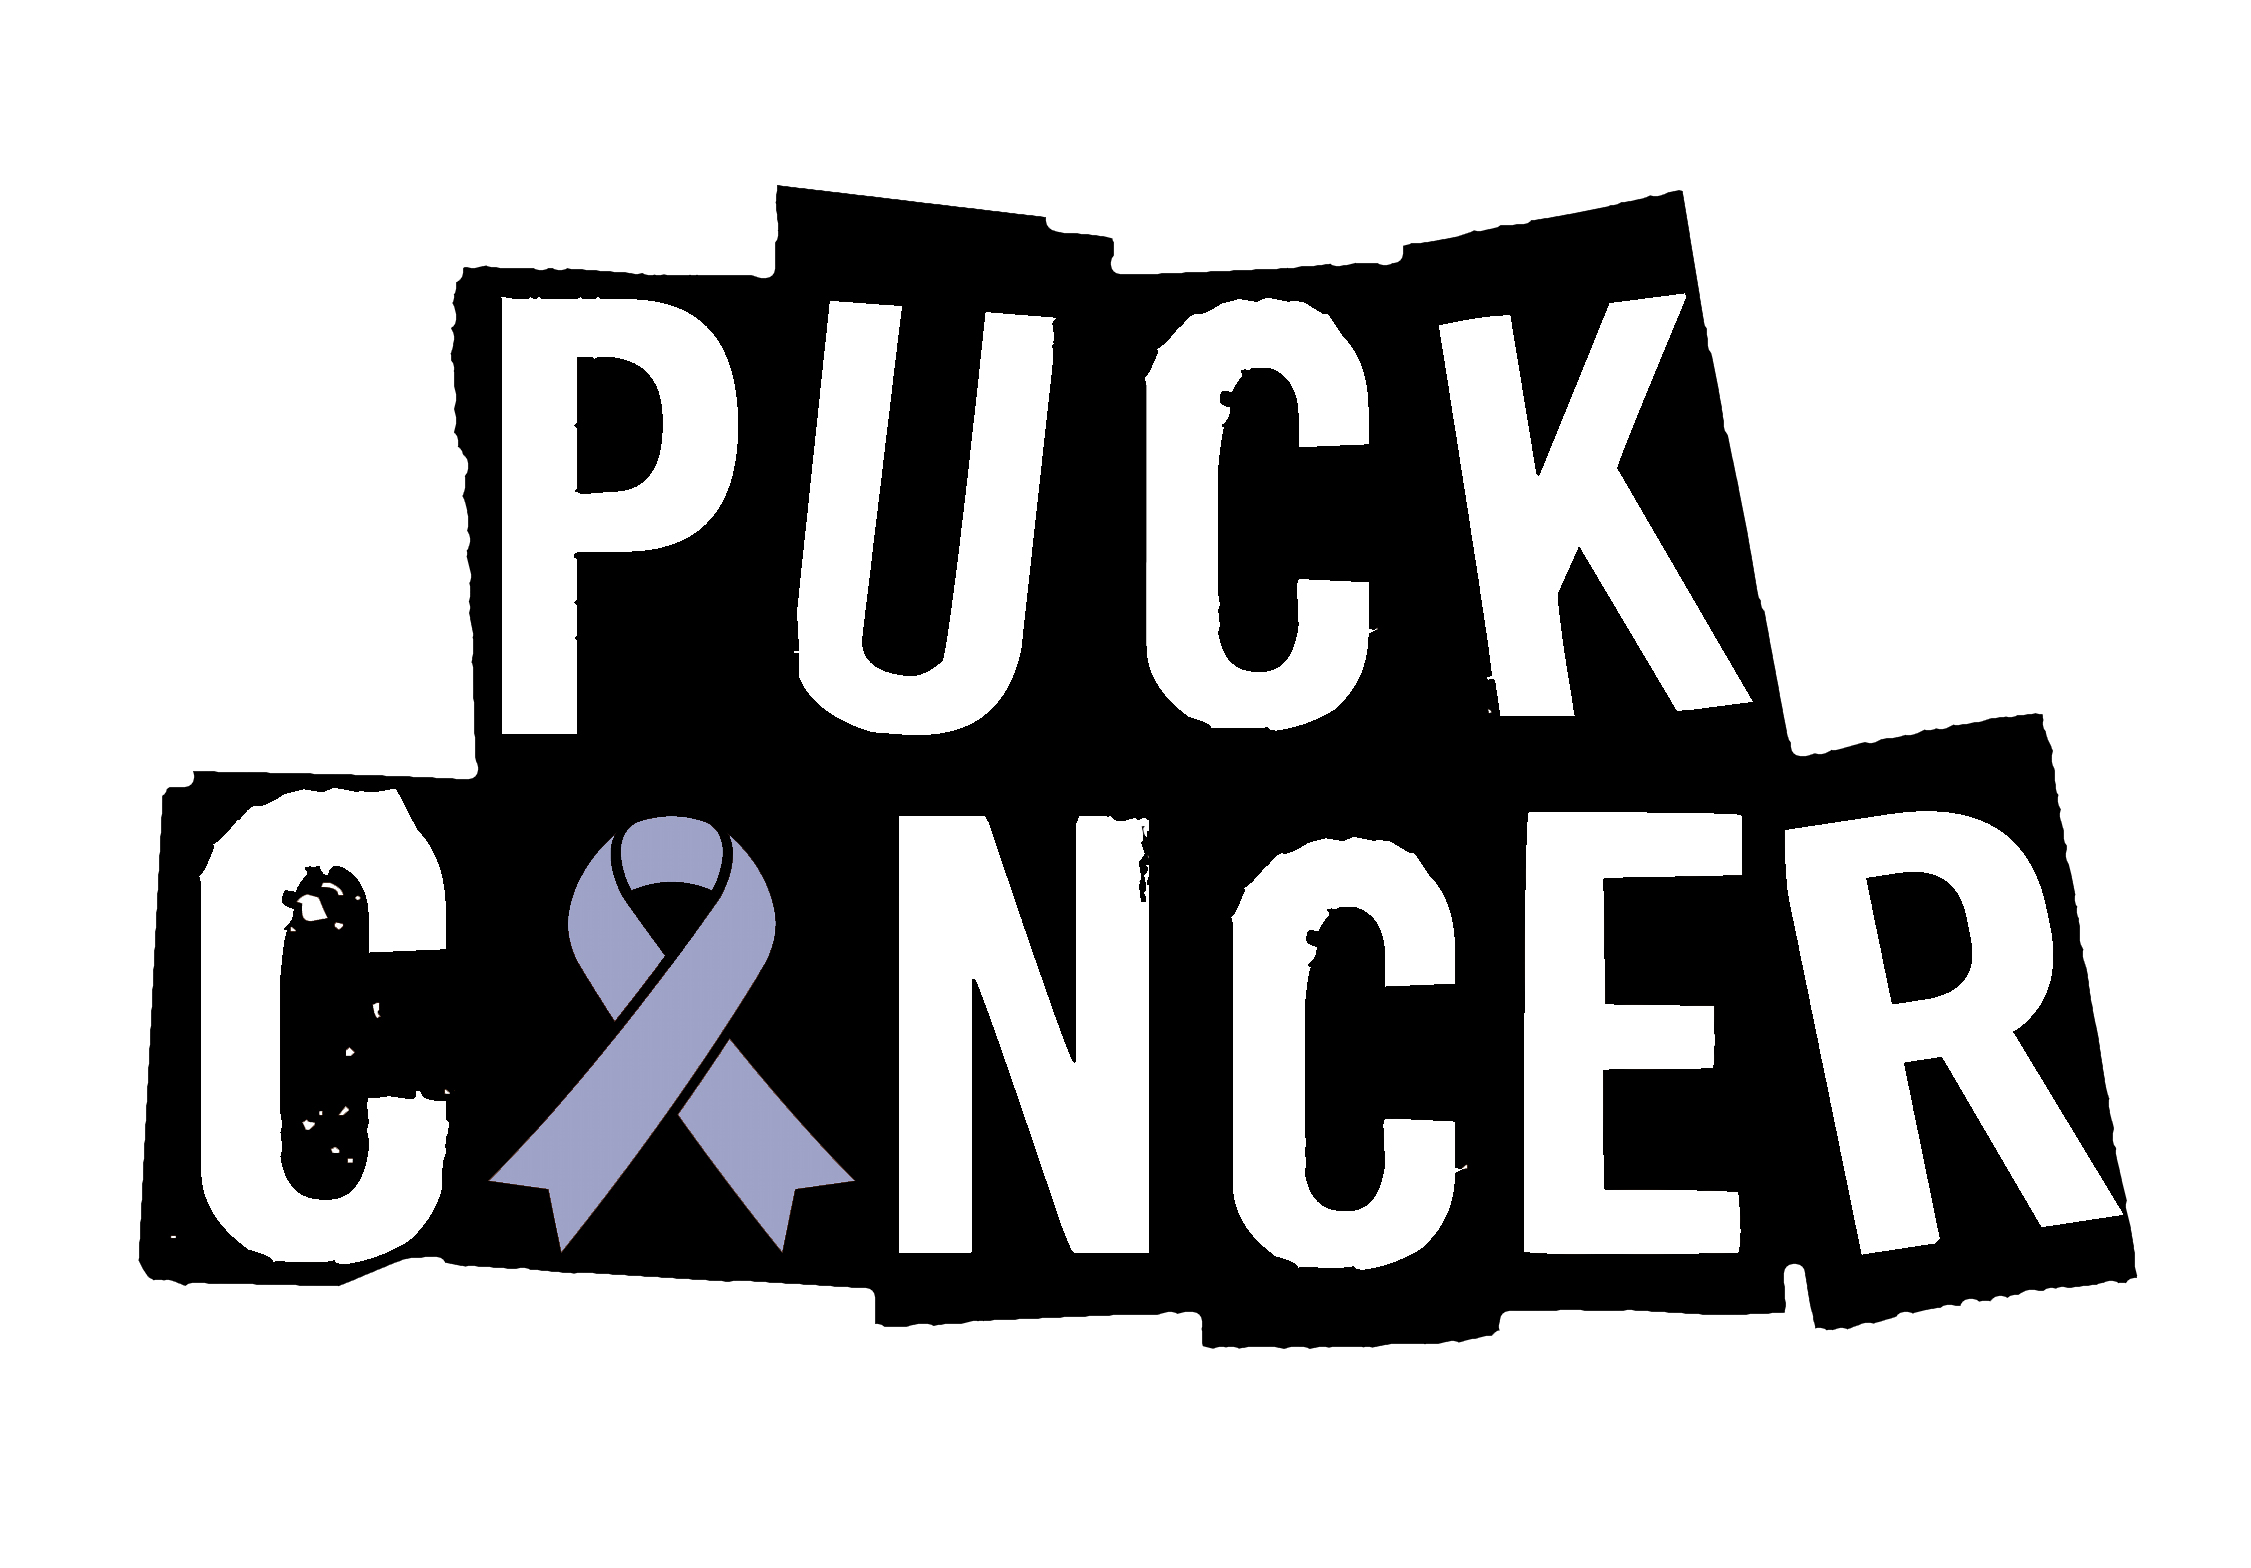 Puck Cancer Online Store